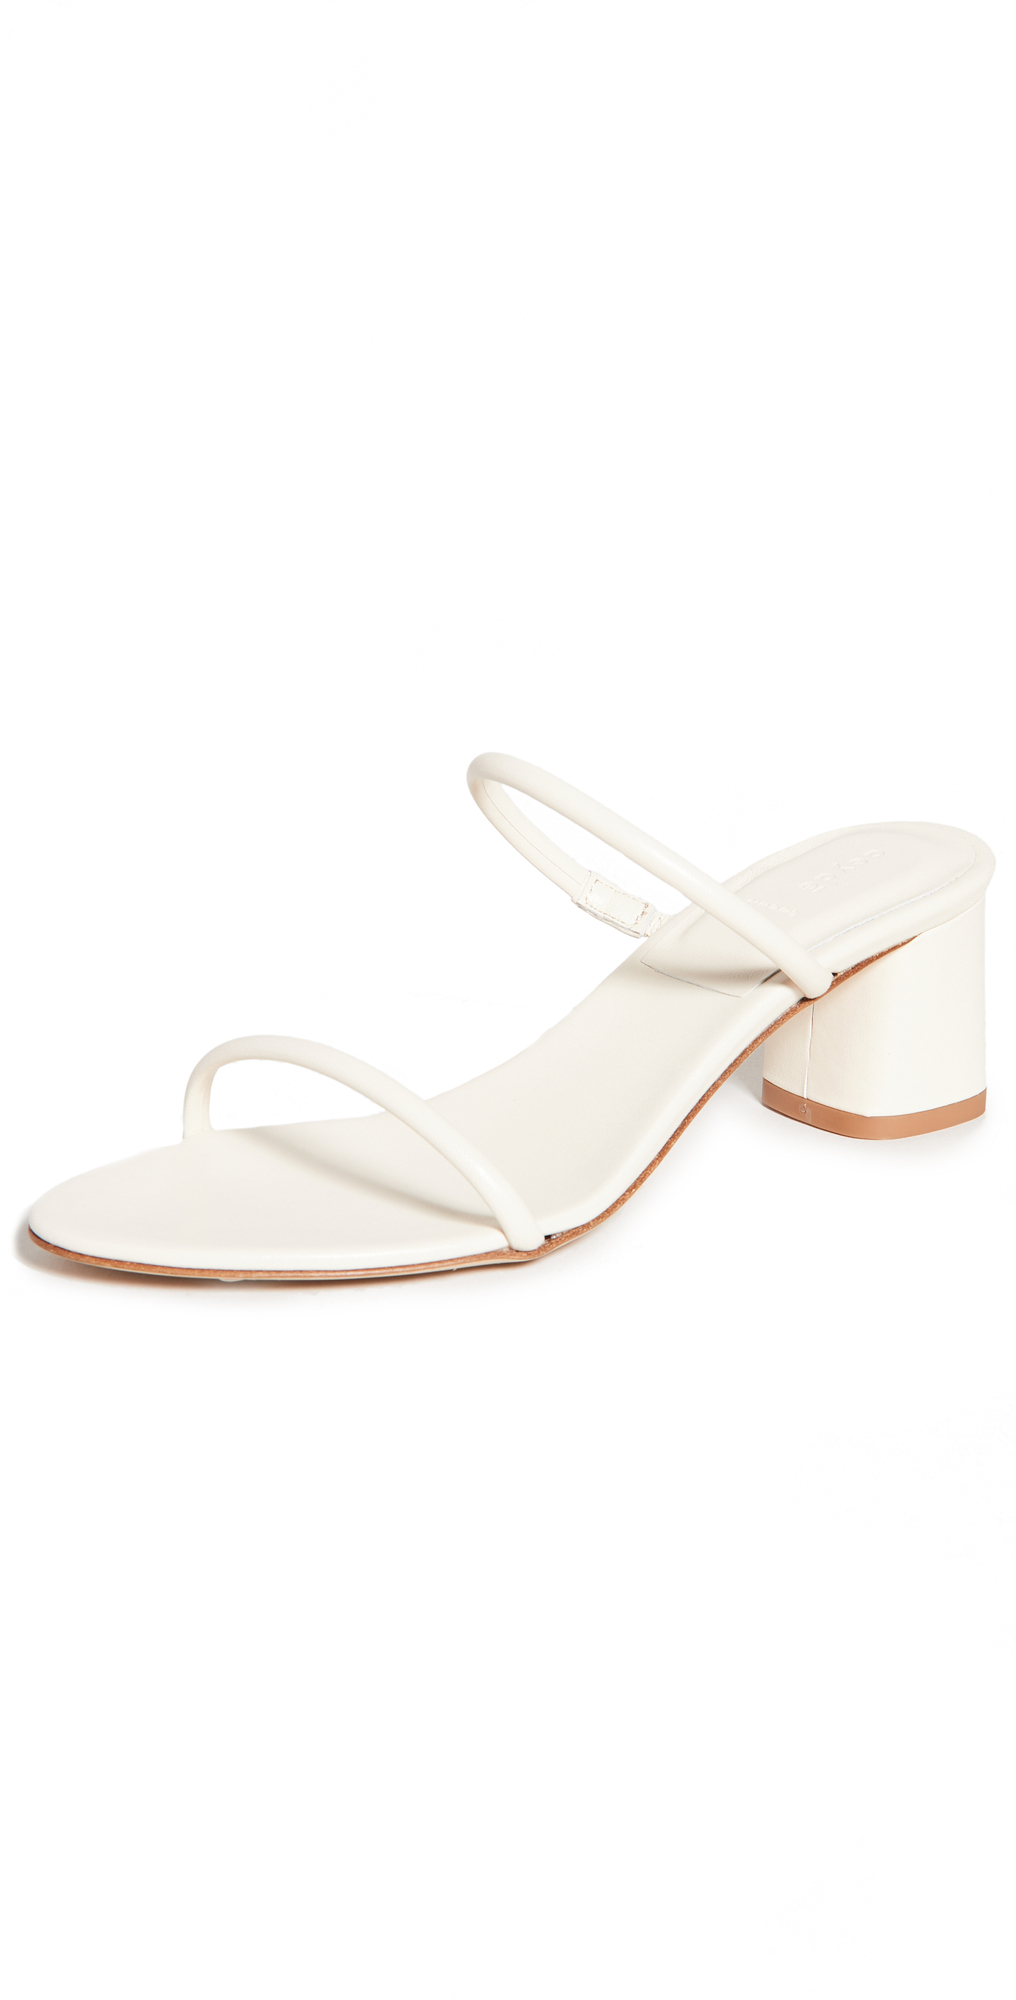 Buy AEYDE Anni Sandals Shoes Online | Shoes Trove